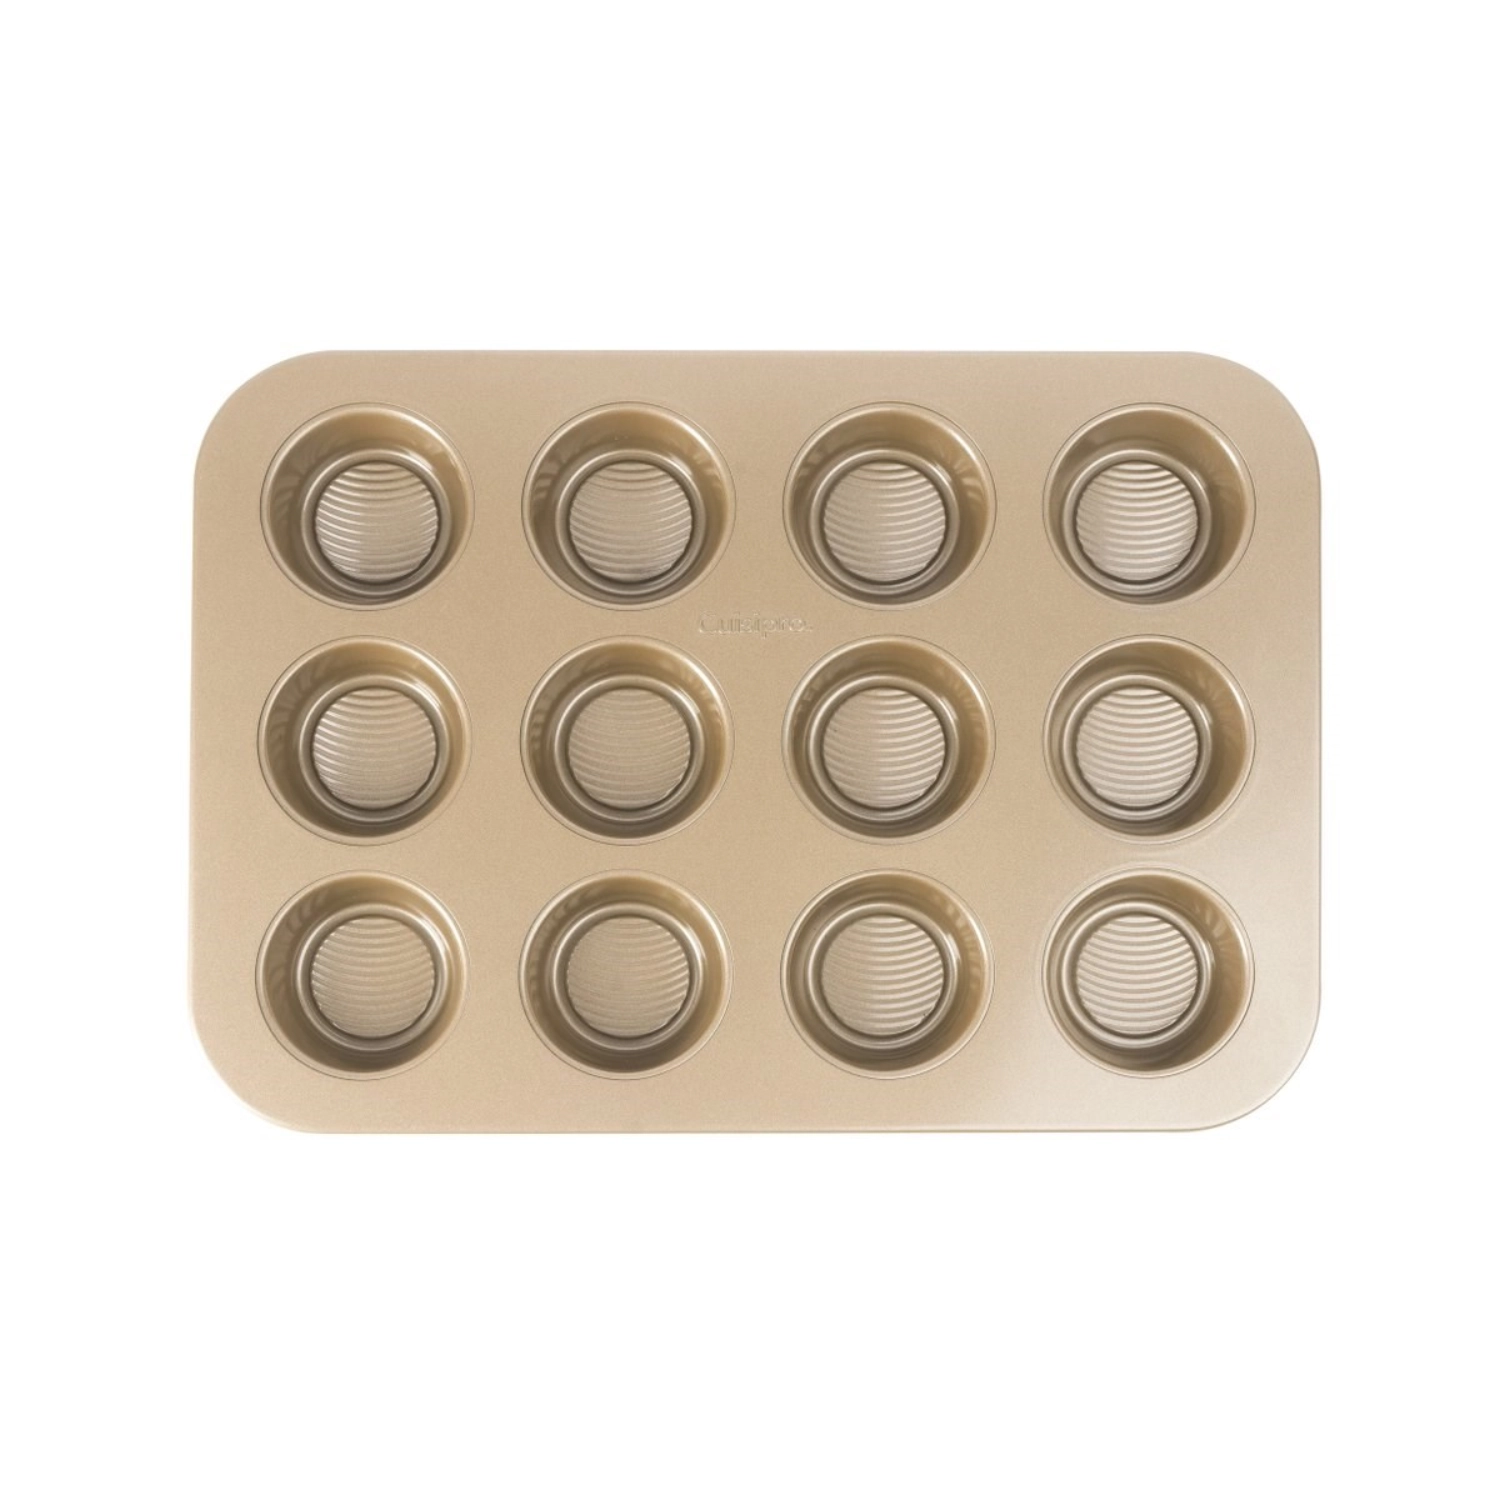 Muffin tray , 12 cup 40x28.3x2.8cm carbon steel